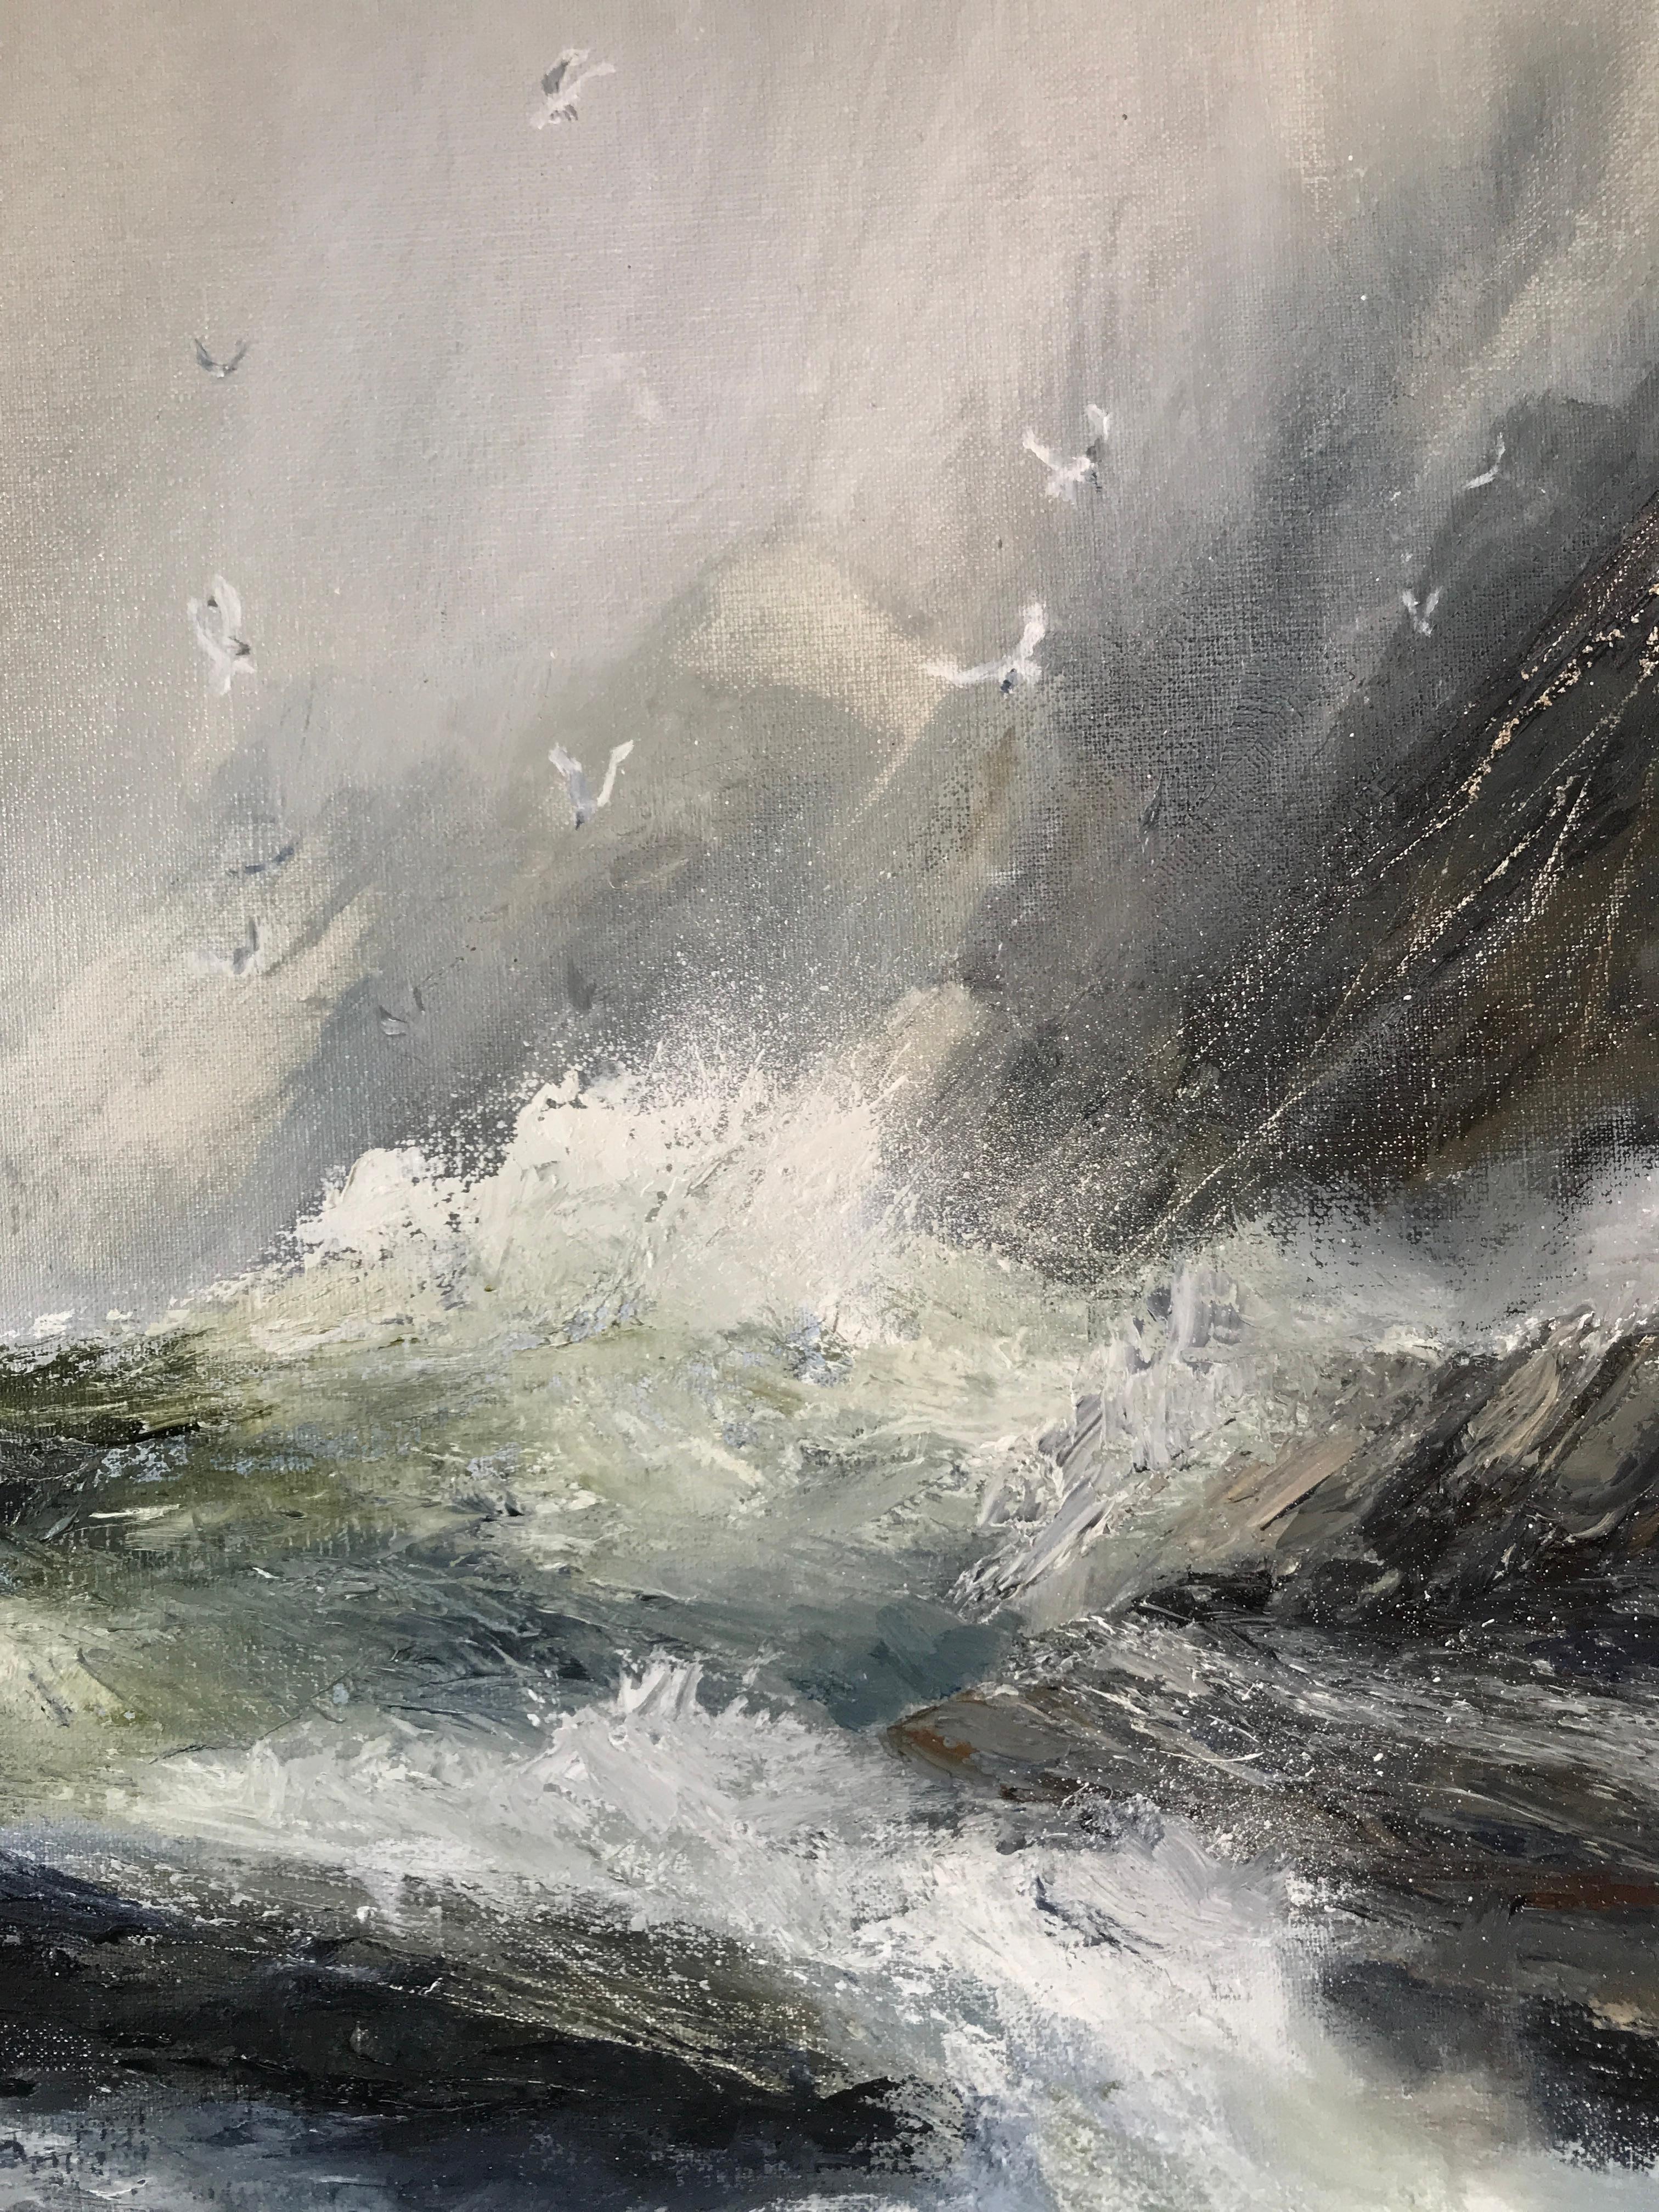 What Lies Beneath the Salt is Fiction, Original painting, Seascape, Stormy Sea - Contemporary Painting by Kim Pragnell